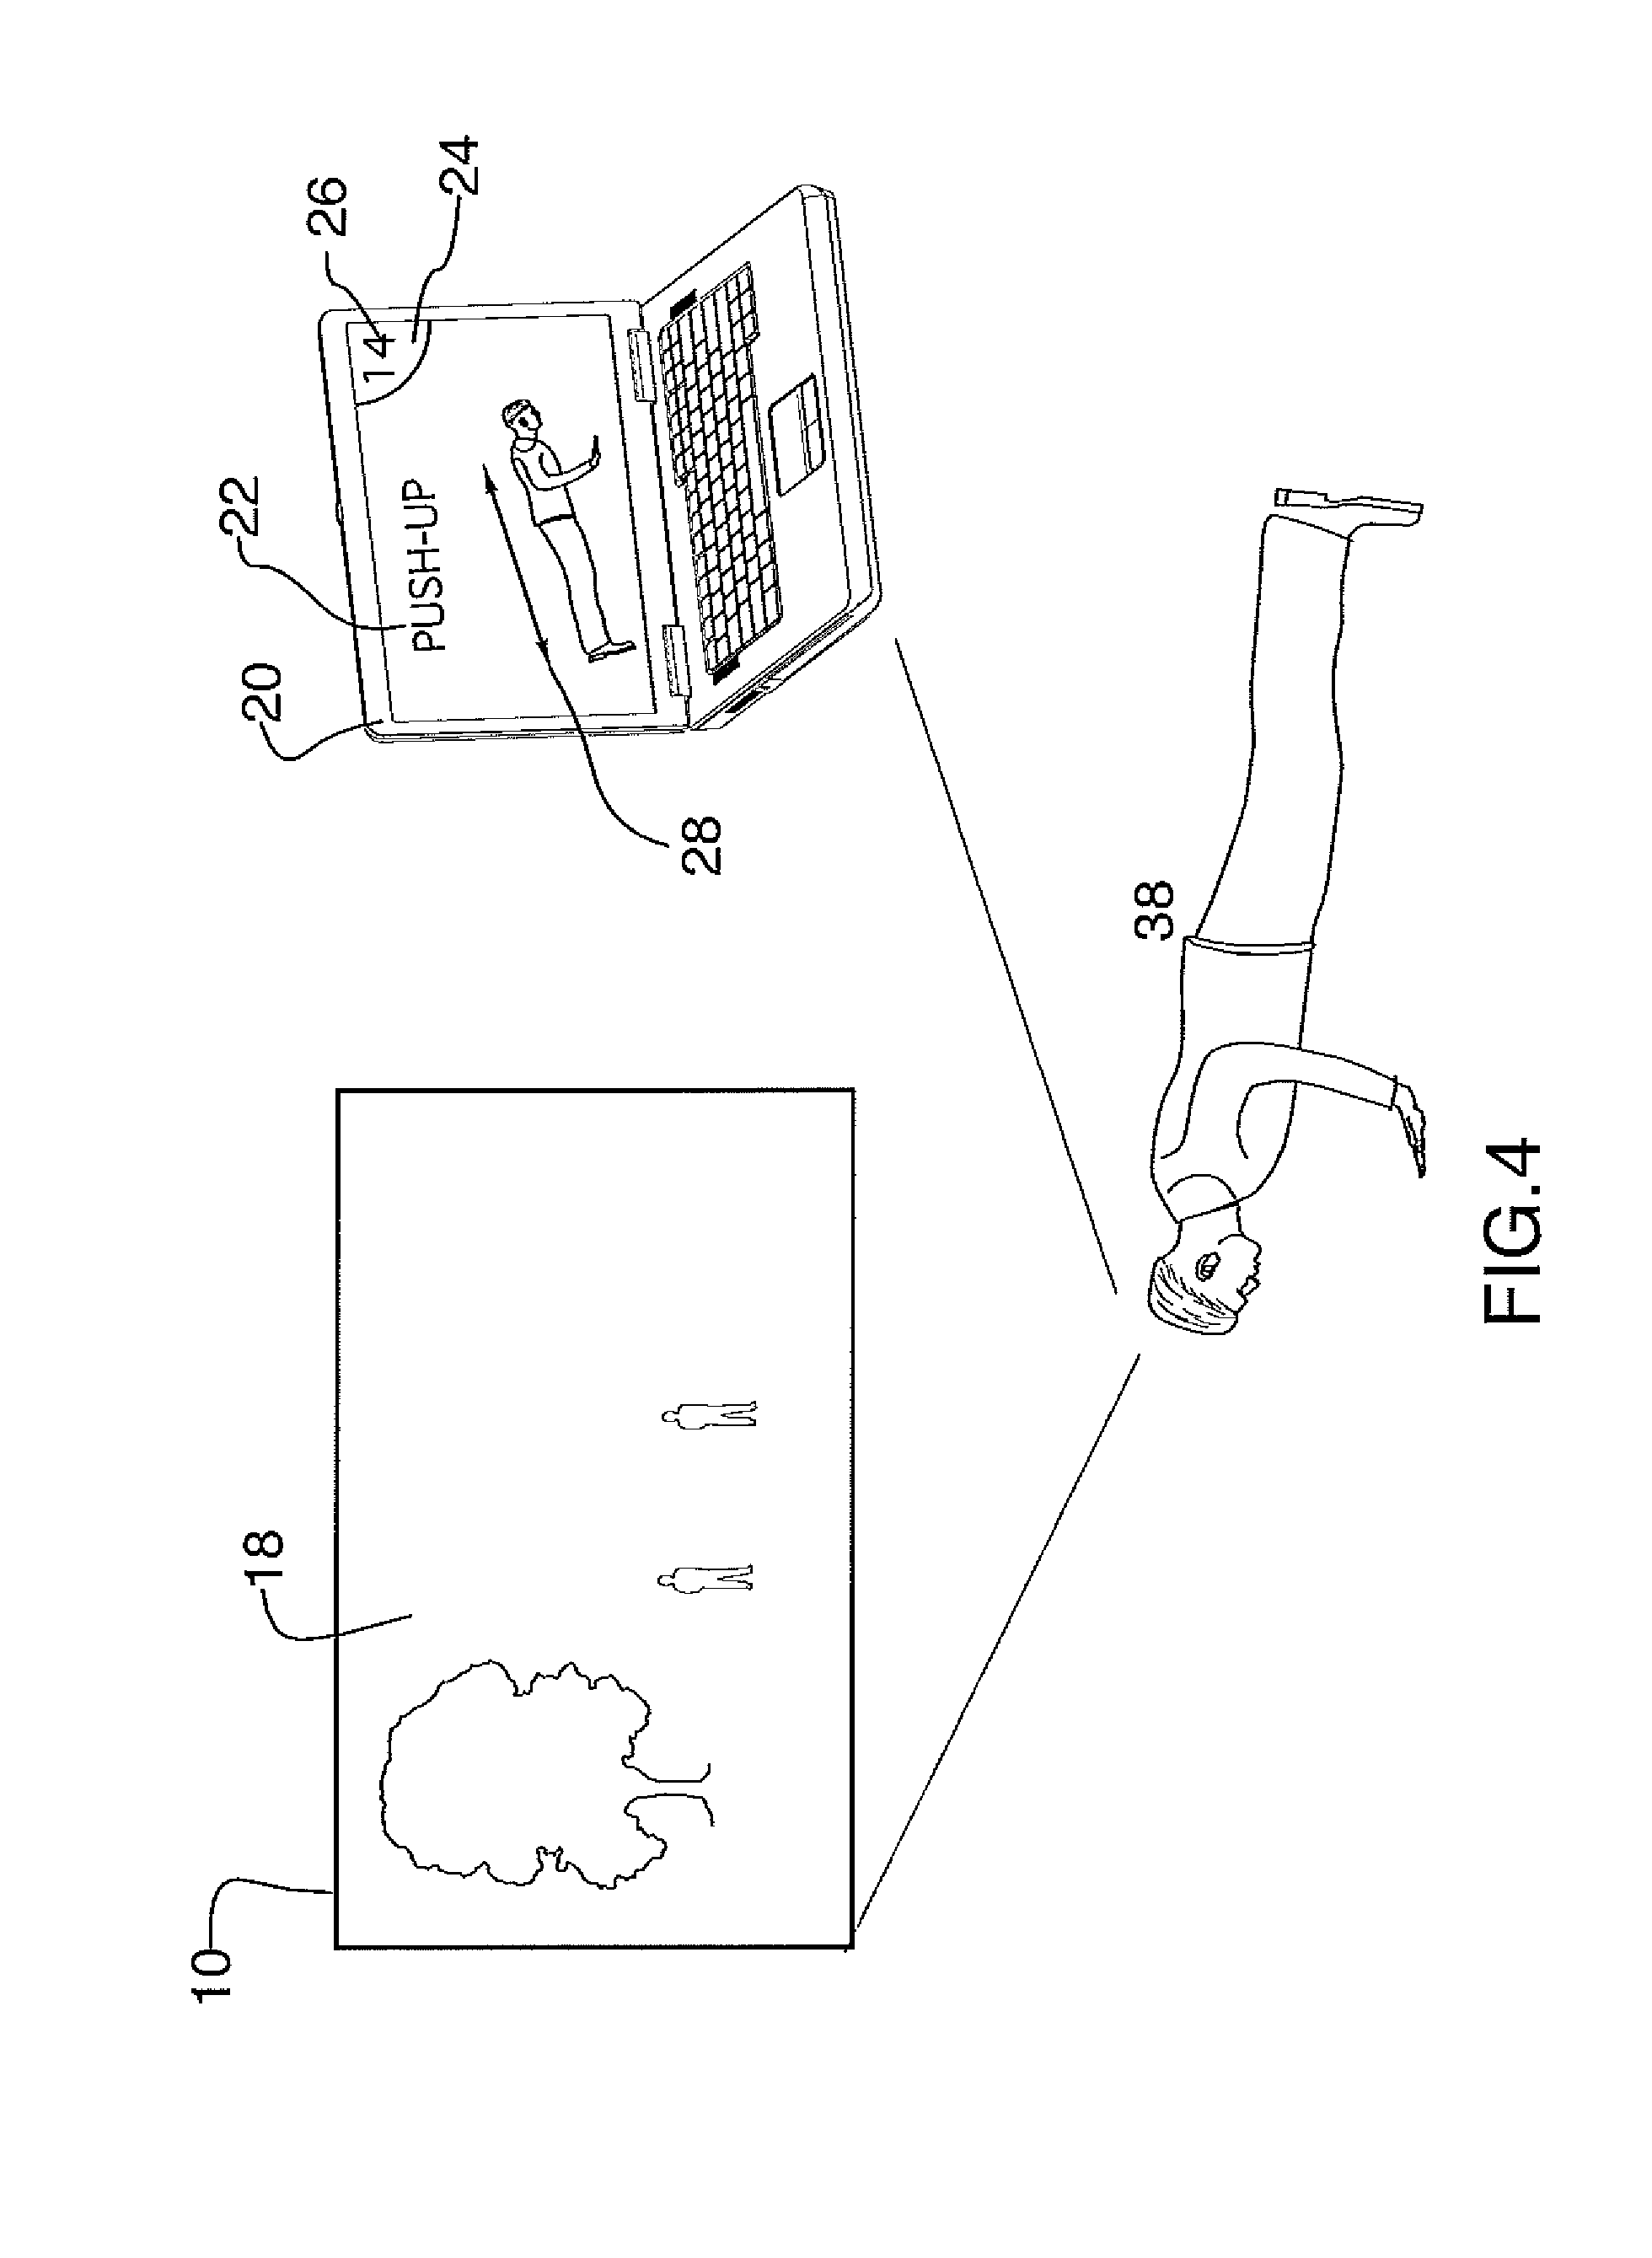 Method and apparatus to convey visual physical activity instructions on a video screen